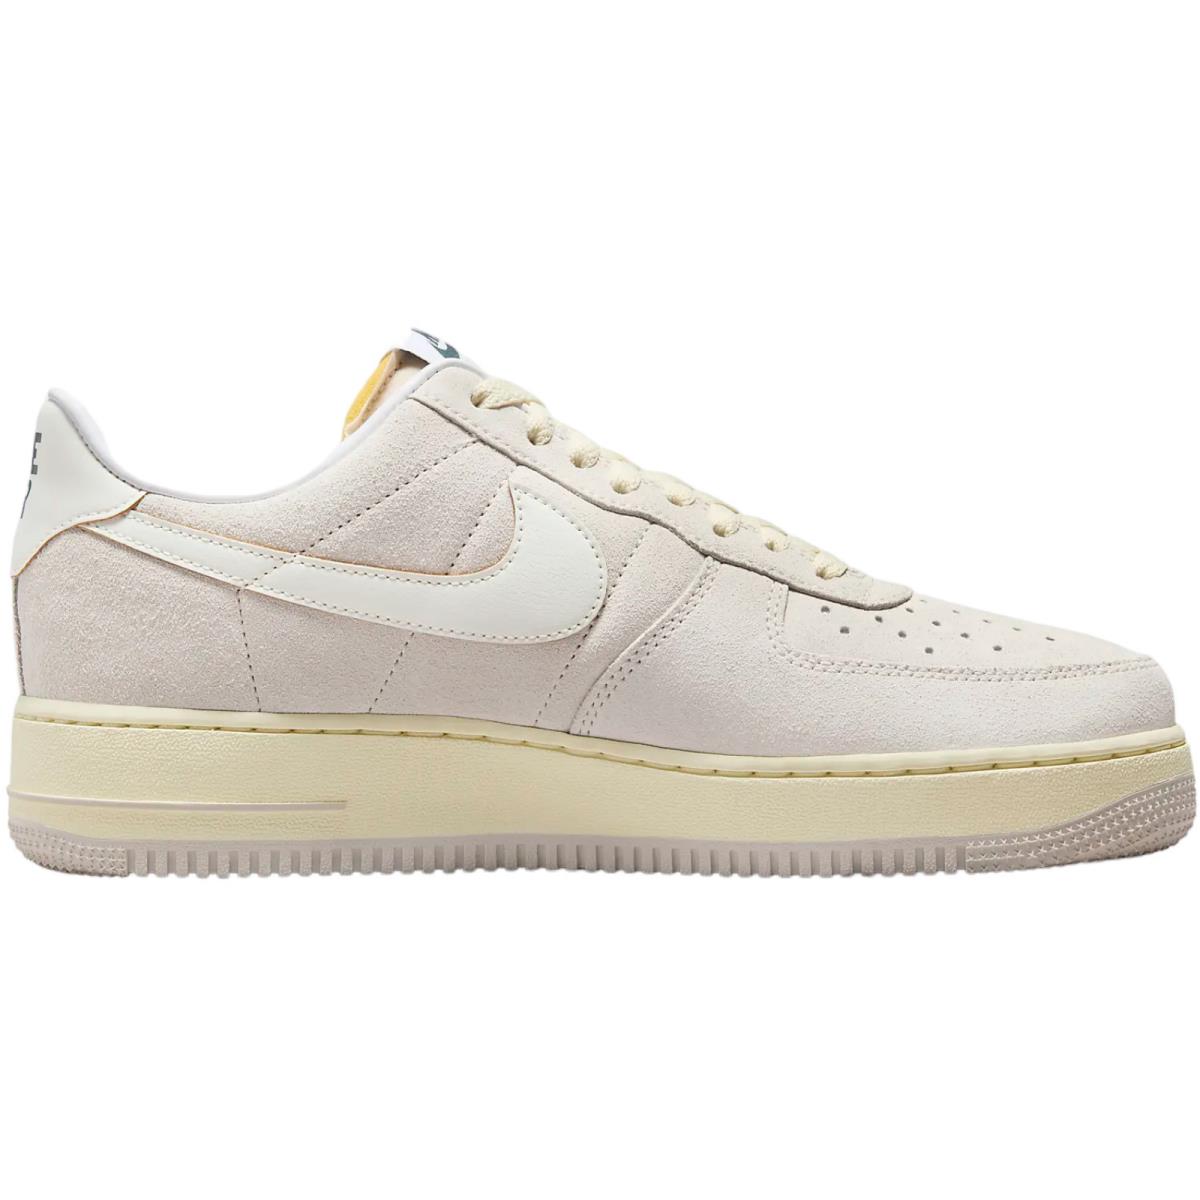 Nike Air Force 1 `07 Men`s Casual Shoes All Colors US Sizes 7-14 Light Orewood Brown/Coconut Milk/Jungle/Sail